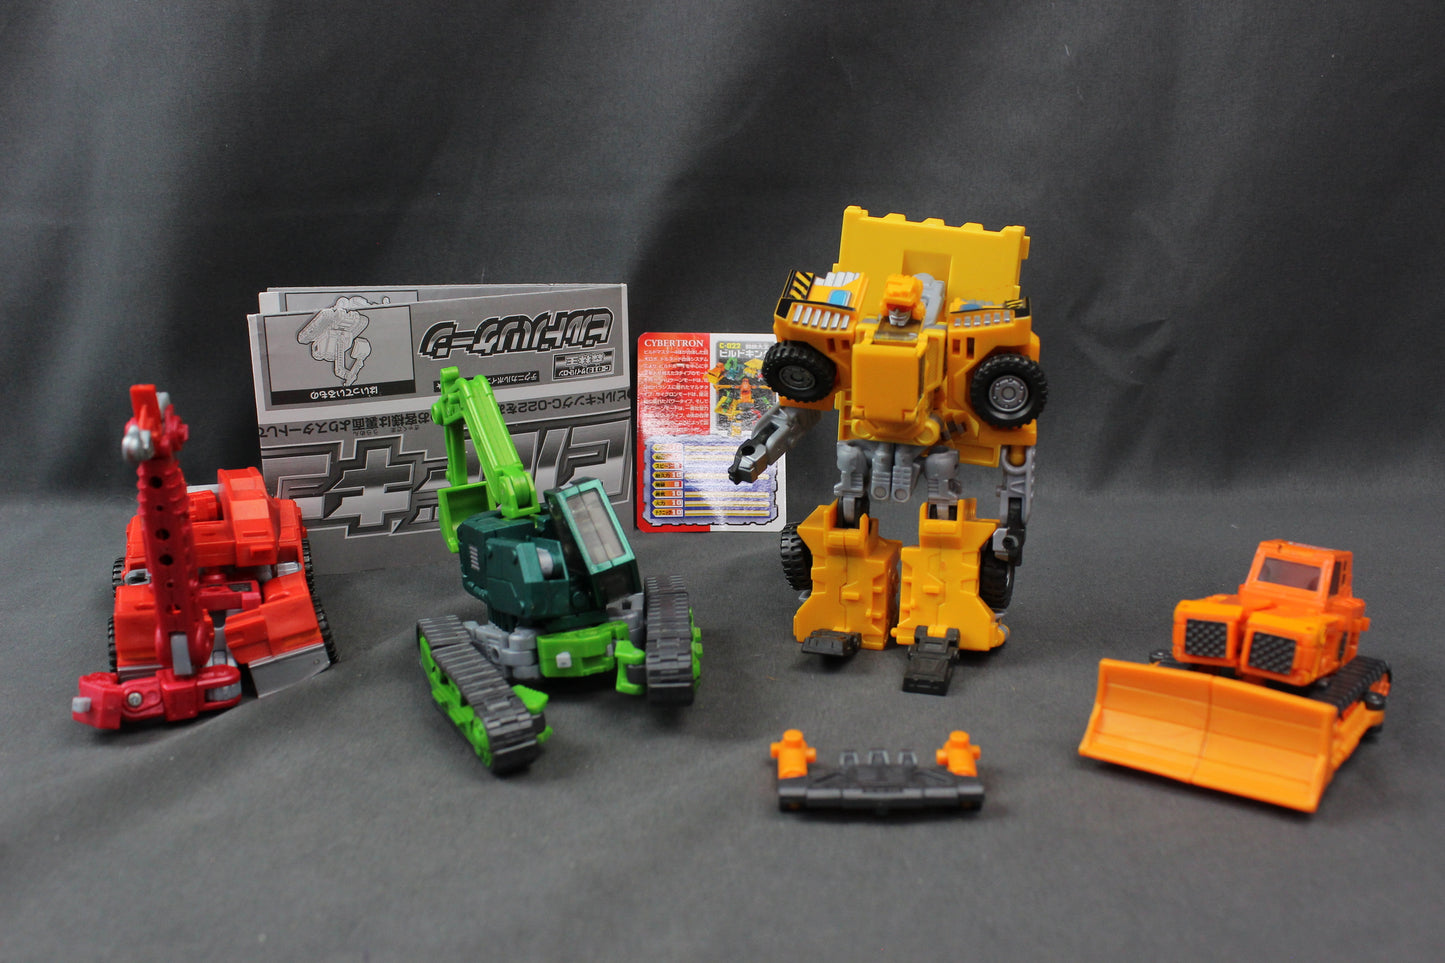 Landfill (Build Team) Complete Robots In Disguise Transformers Loose